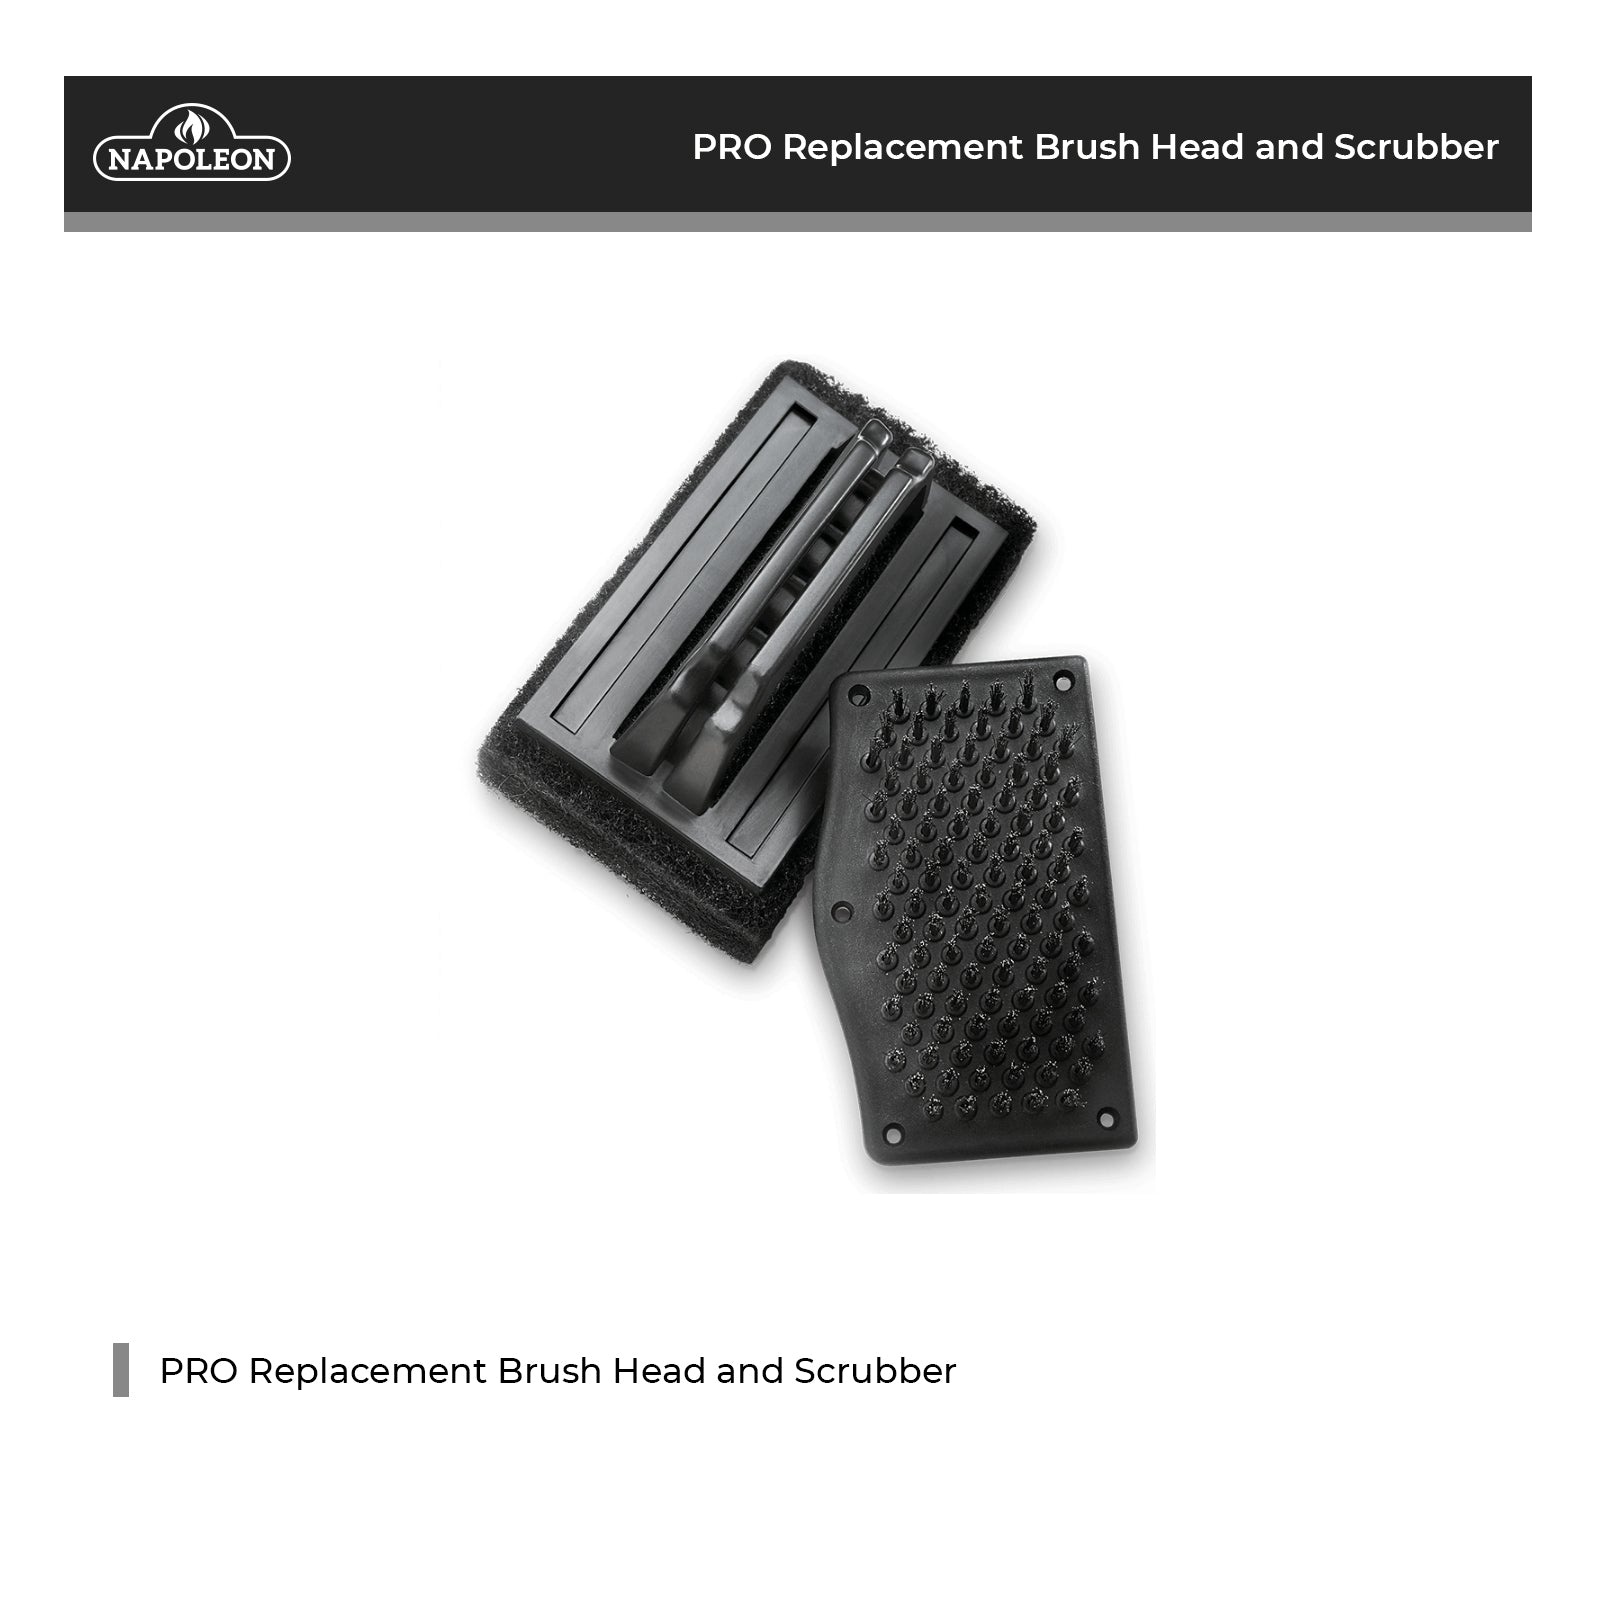 Napoleon Replacement Brush Head and Scrubber - 70007